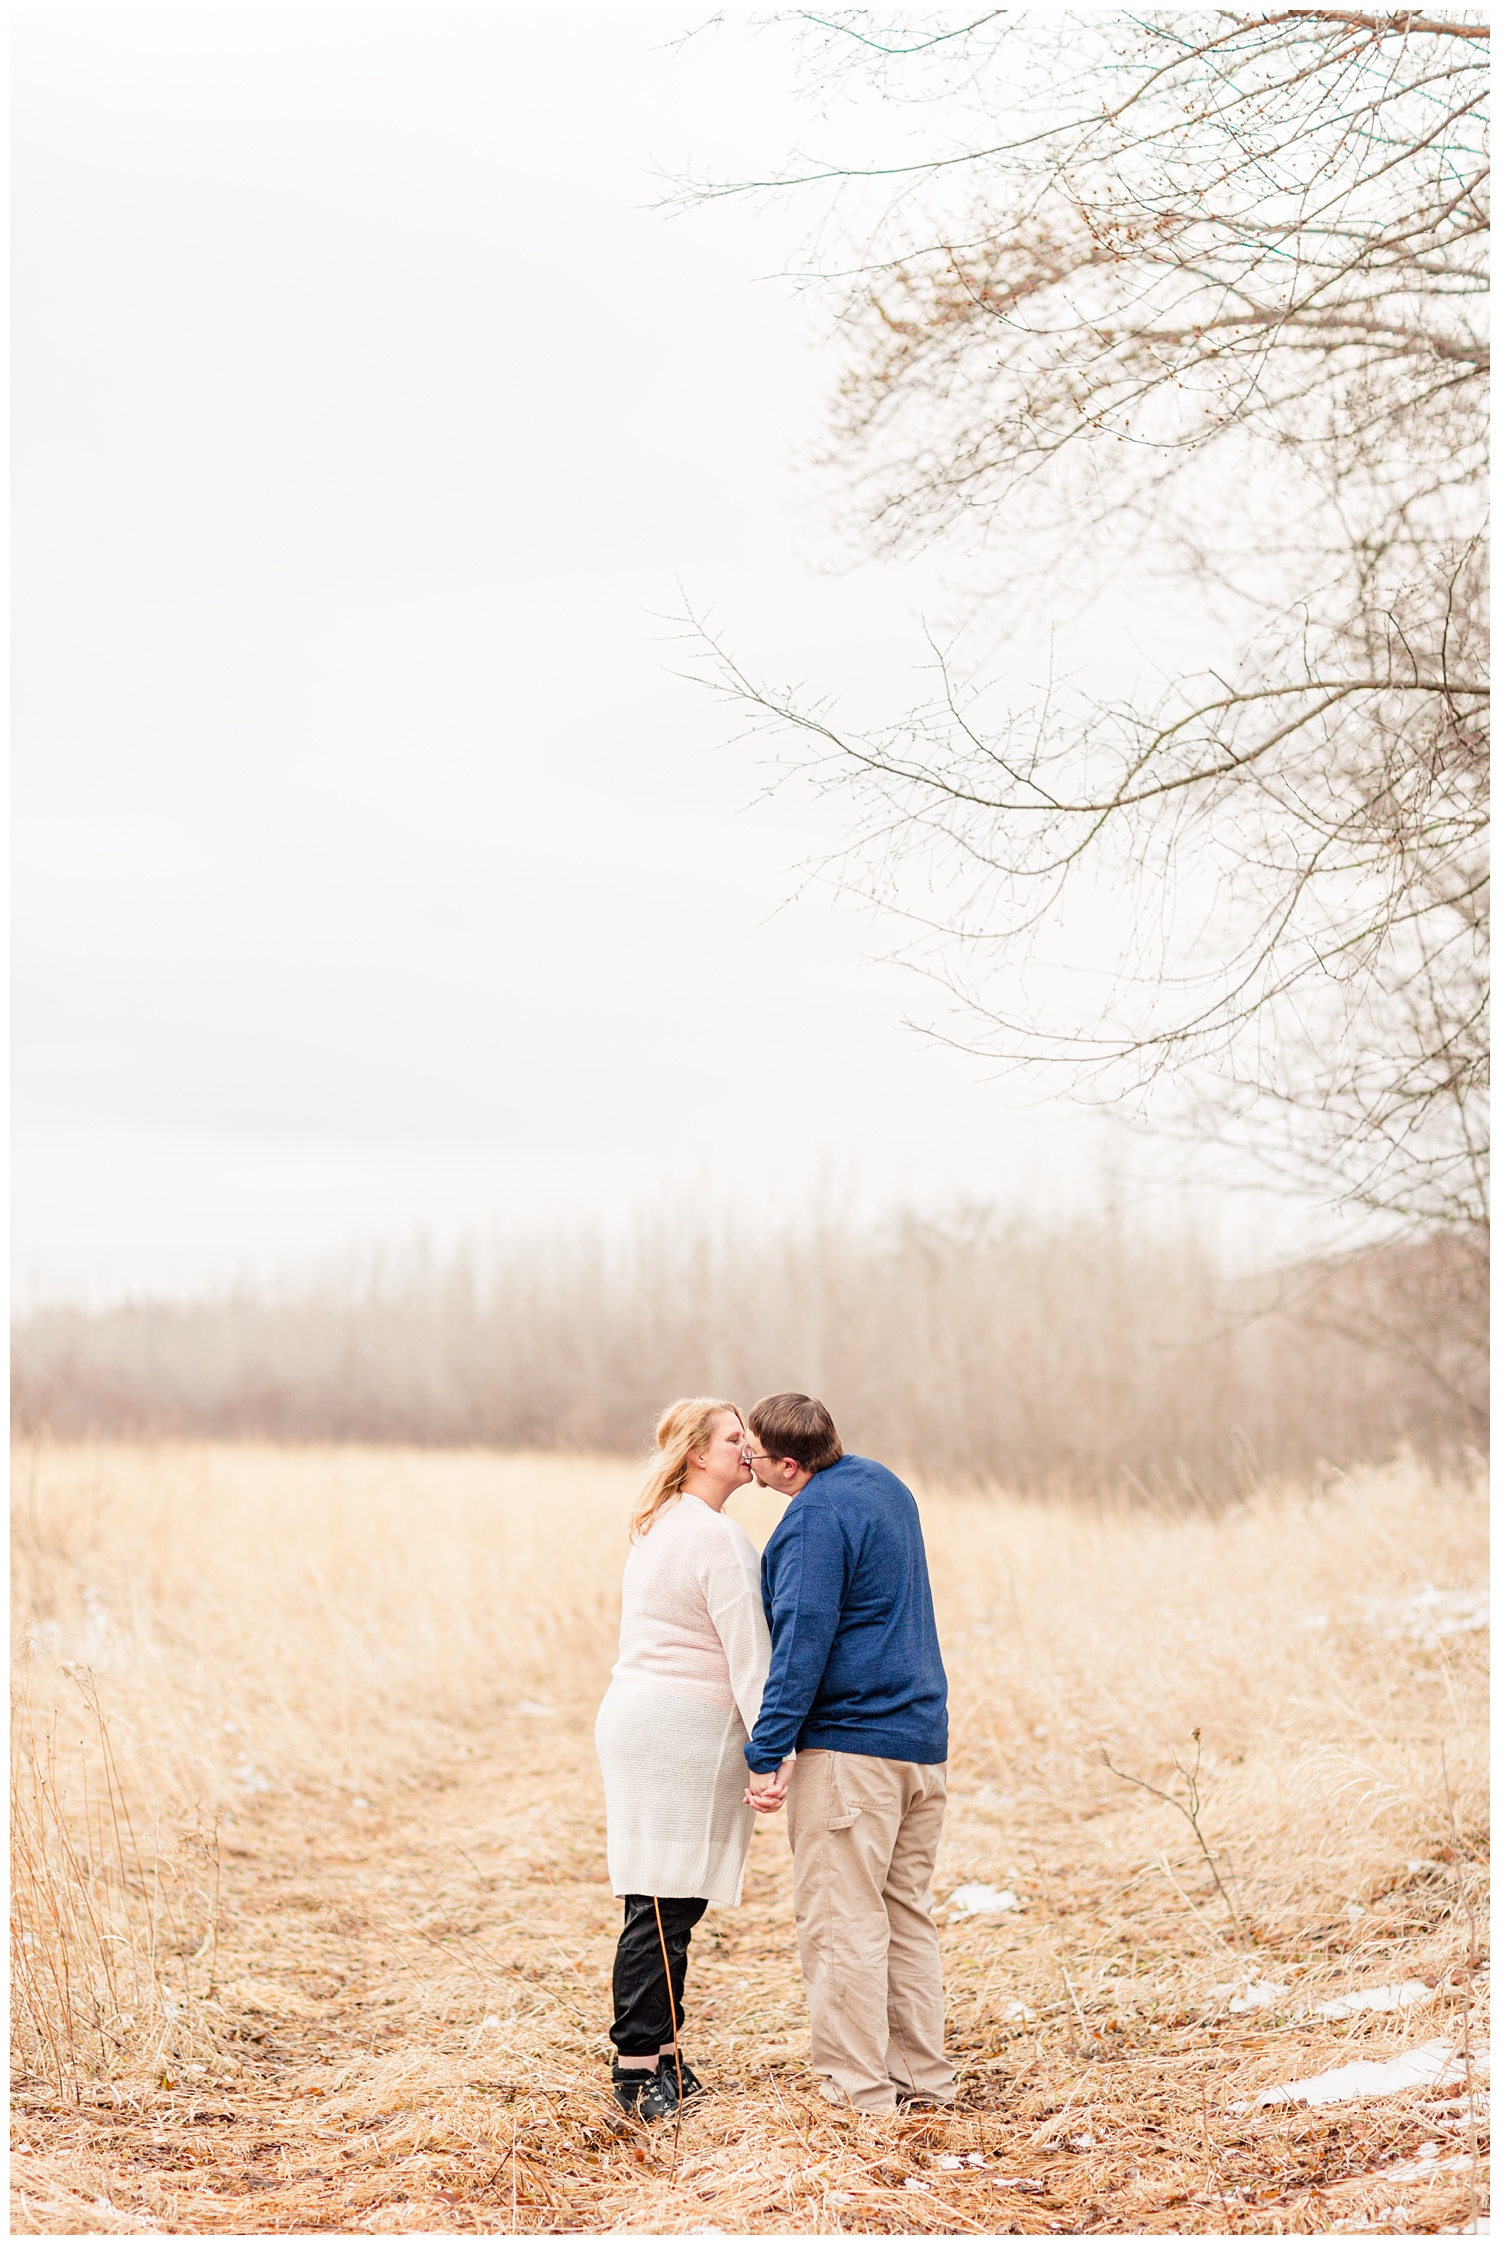 Engagement shoot in a grassy pasture in central Iowa in mid-March